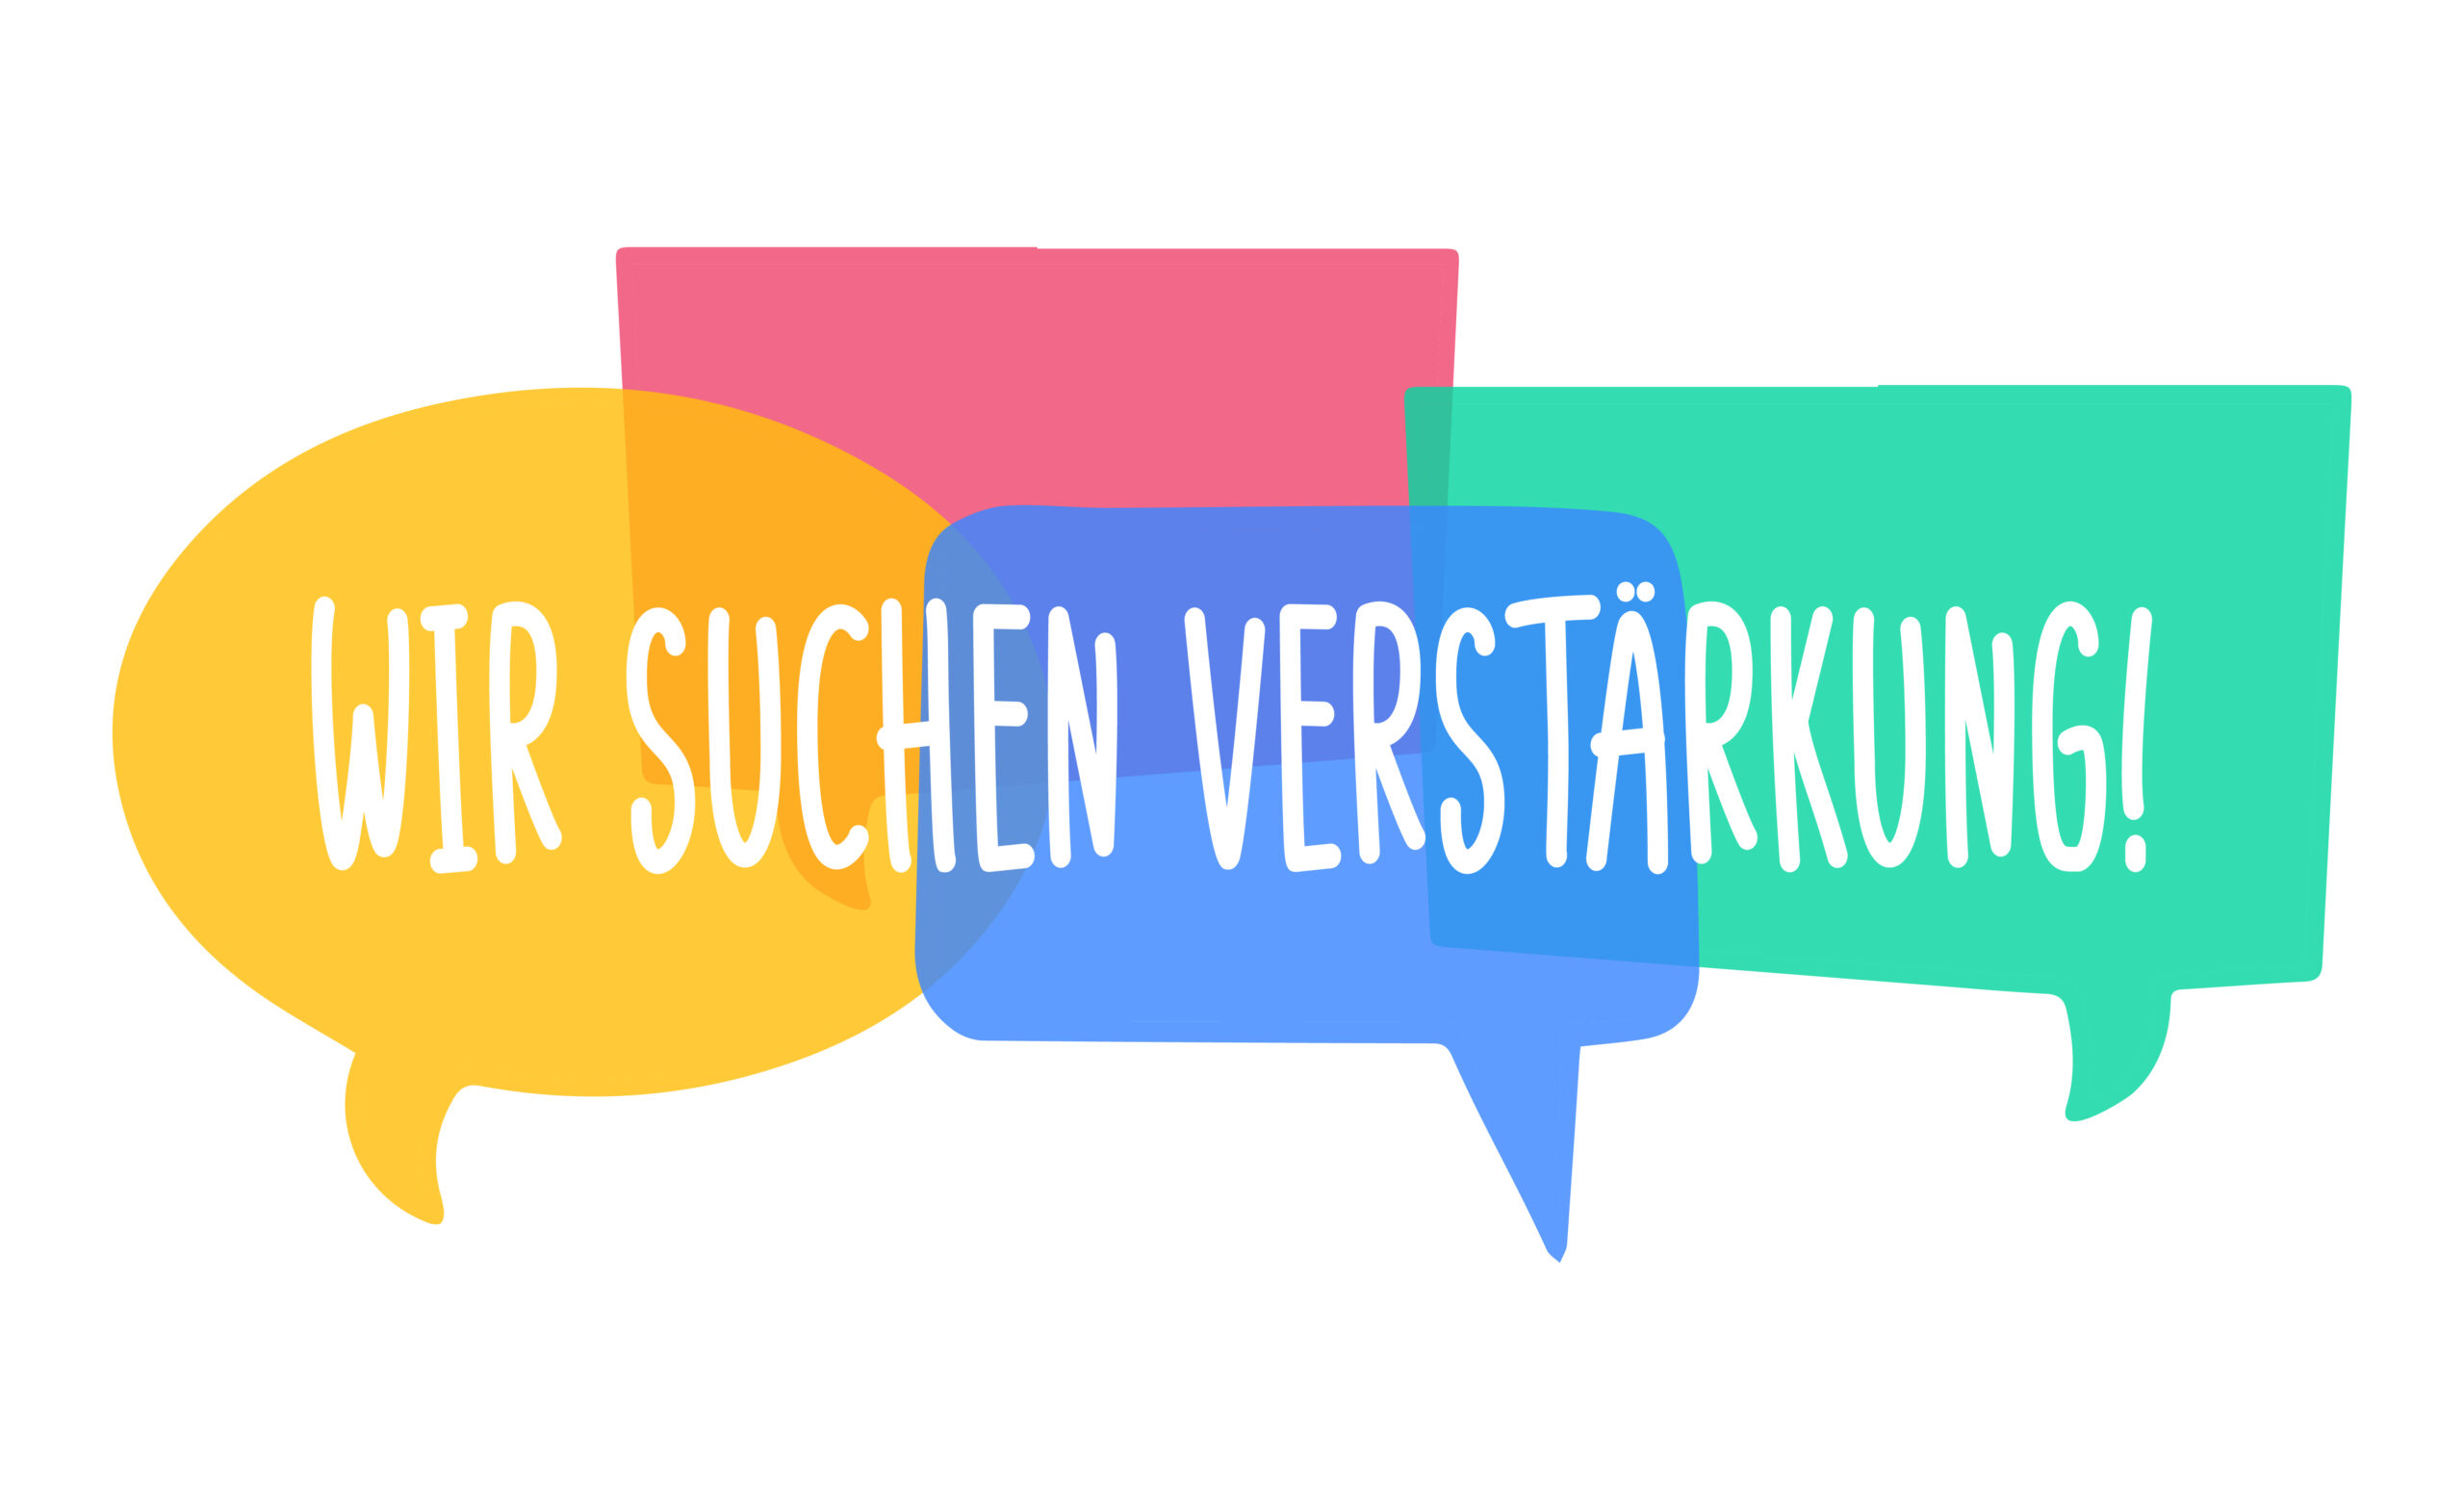 wir suchen verstarkung - German translation - we are looking for reinforcement. Hiring recruitment poster vector design with bright speech bubbles. Vacancy template. Job opening, search.